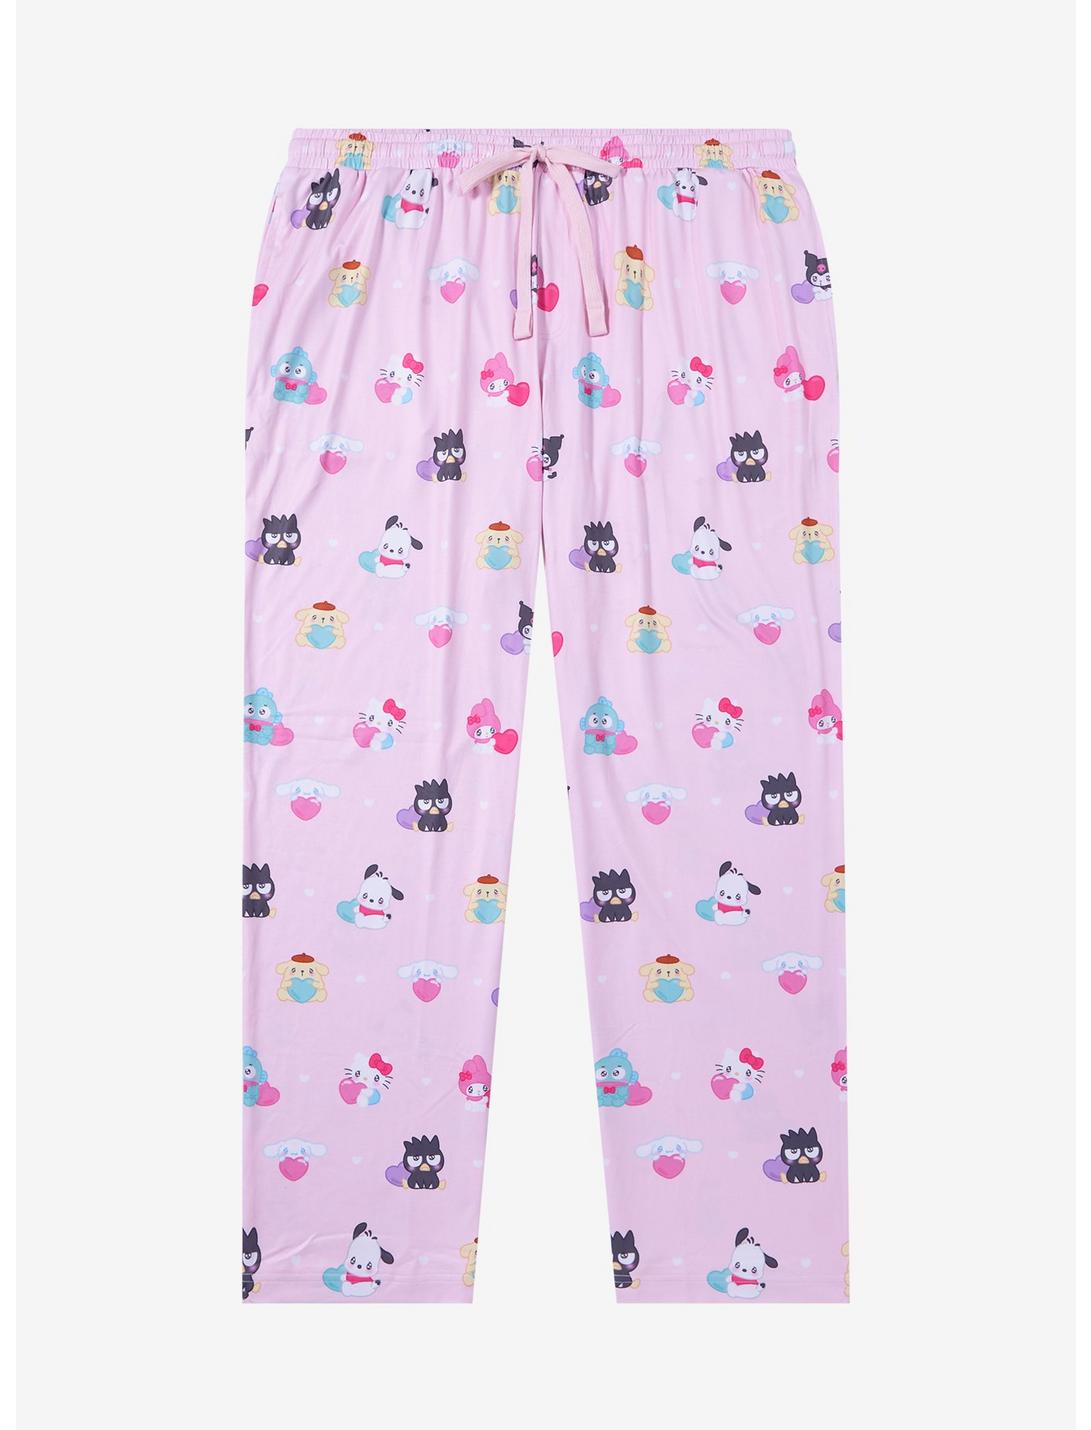 Sanrio Hello Kitty and Friends Emo Kyun Allover Print Plus Size Sleep Pants - BoxLunch Exclusive, PINK, hi-res